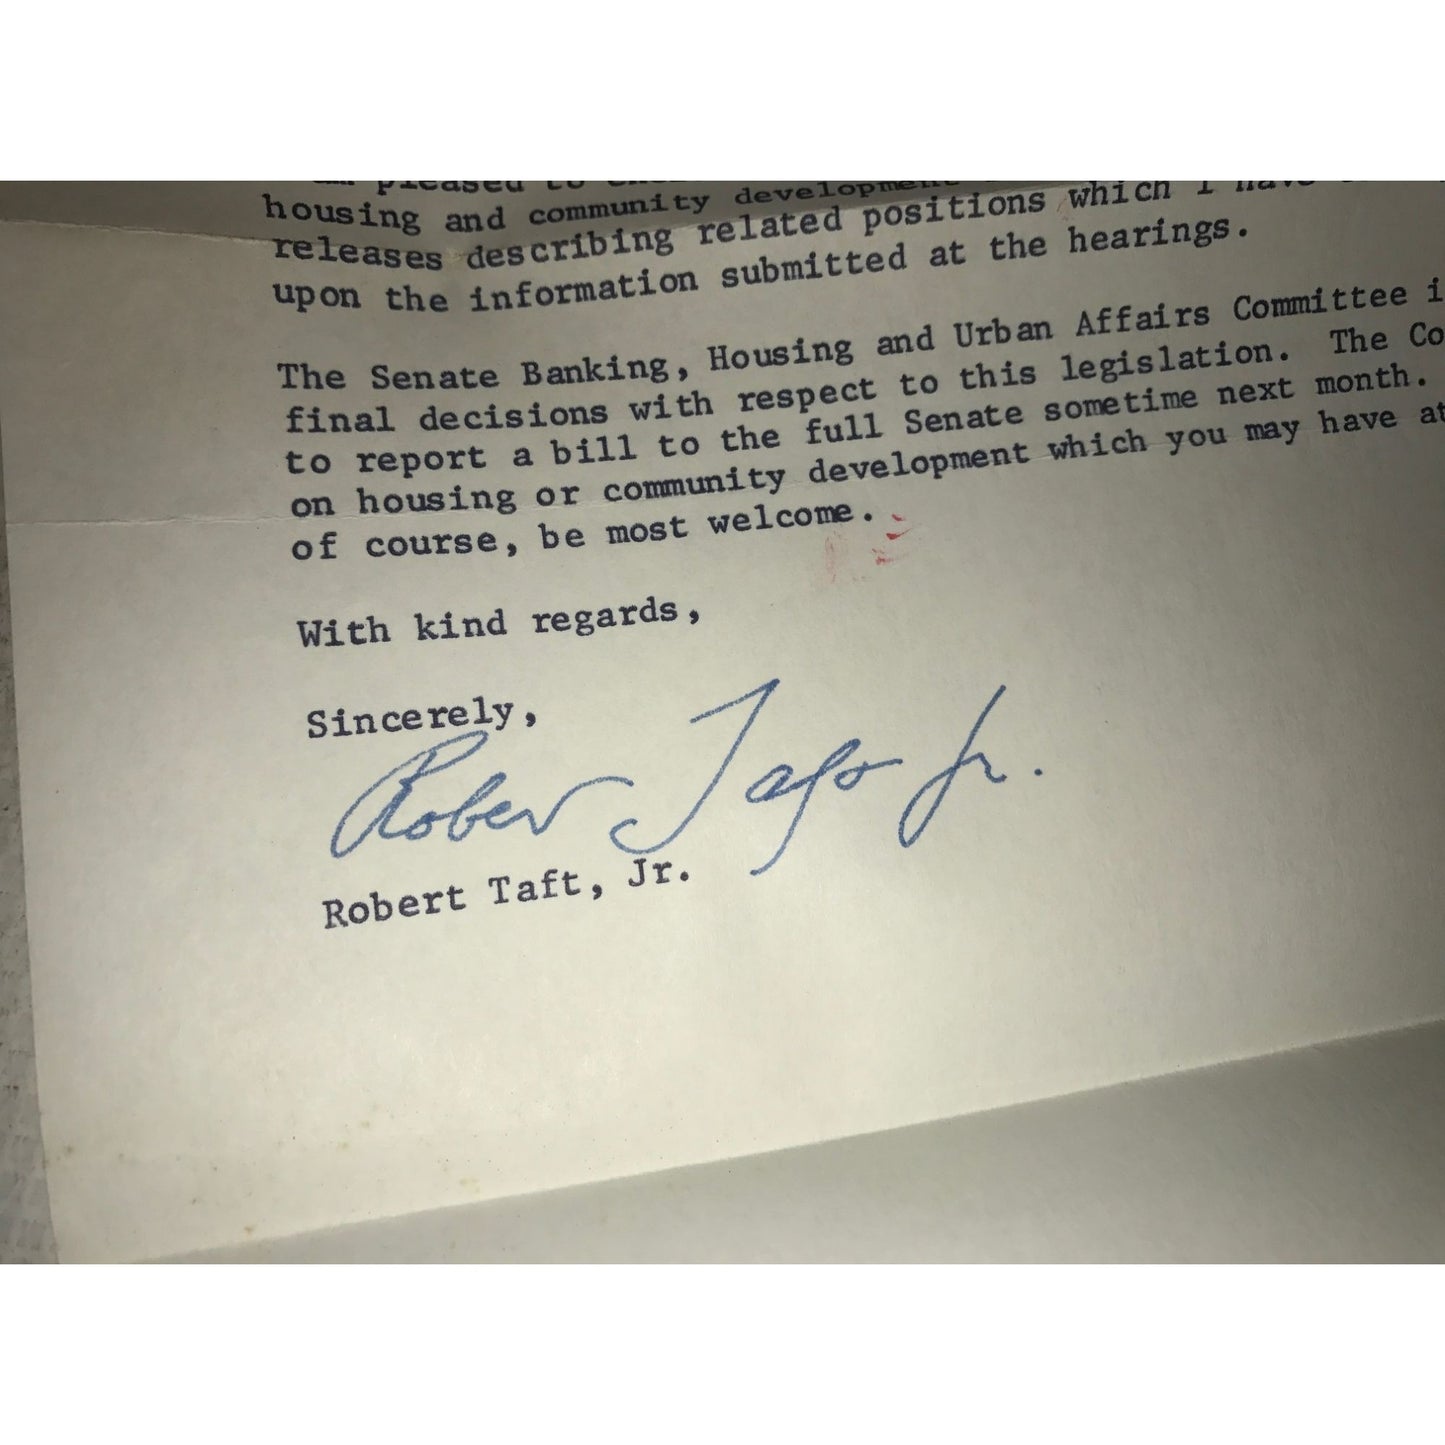 Robert Taft Jr Signed letter and article from newspaper - stapled into Booklet